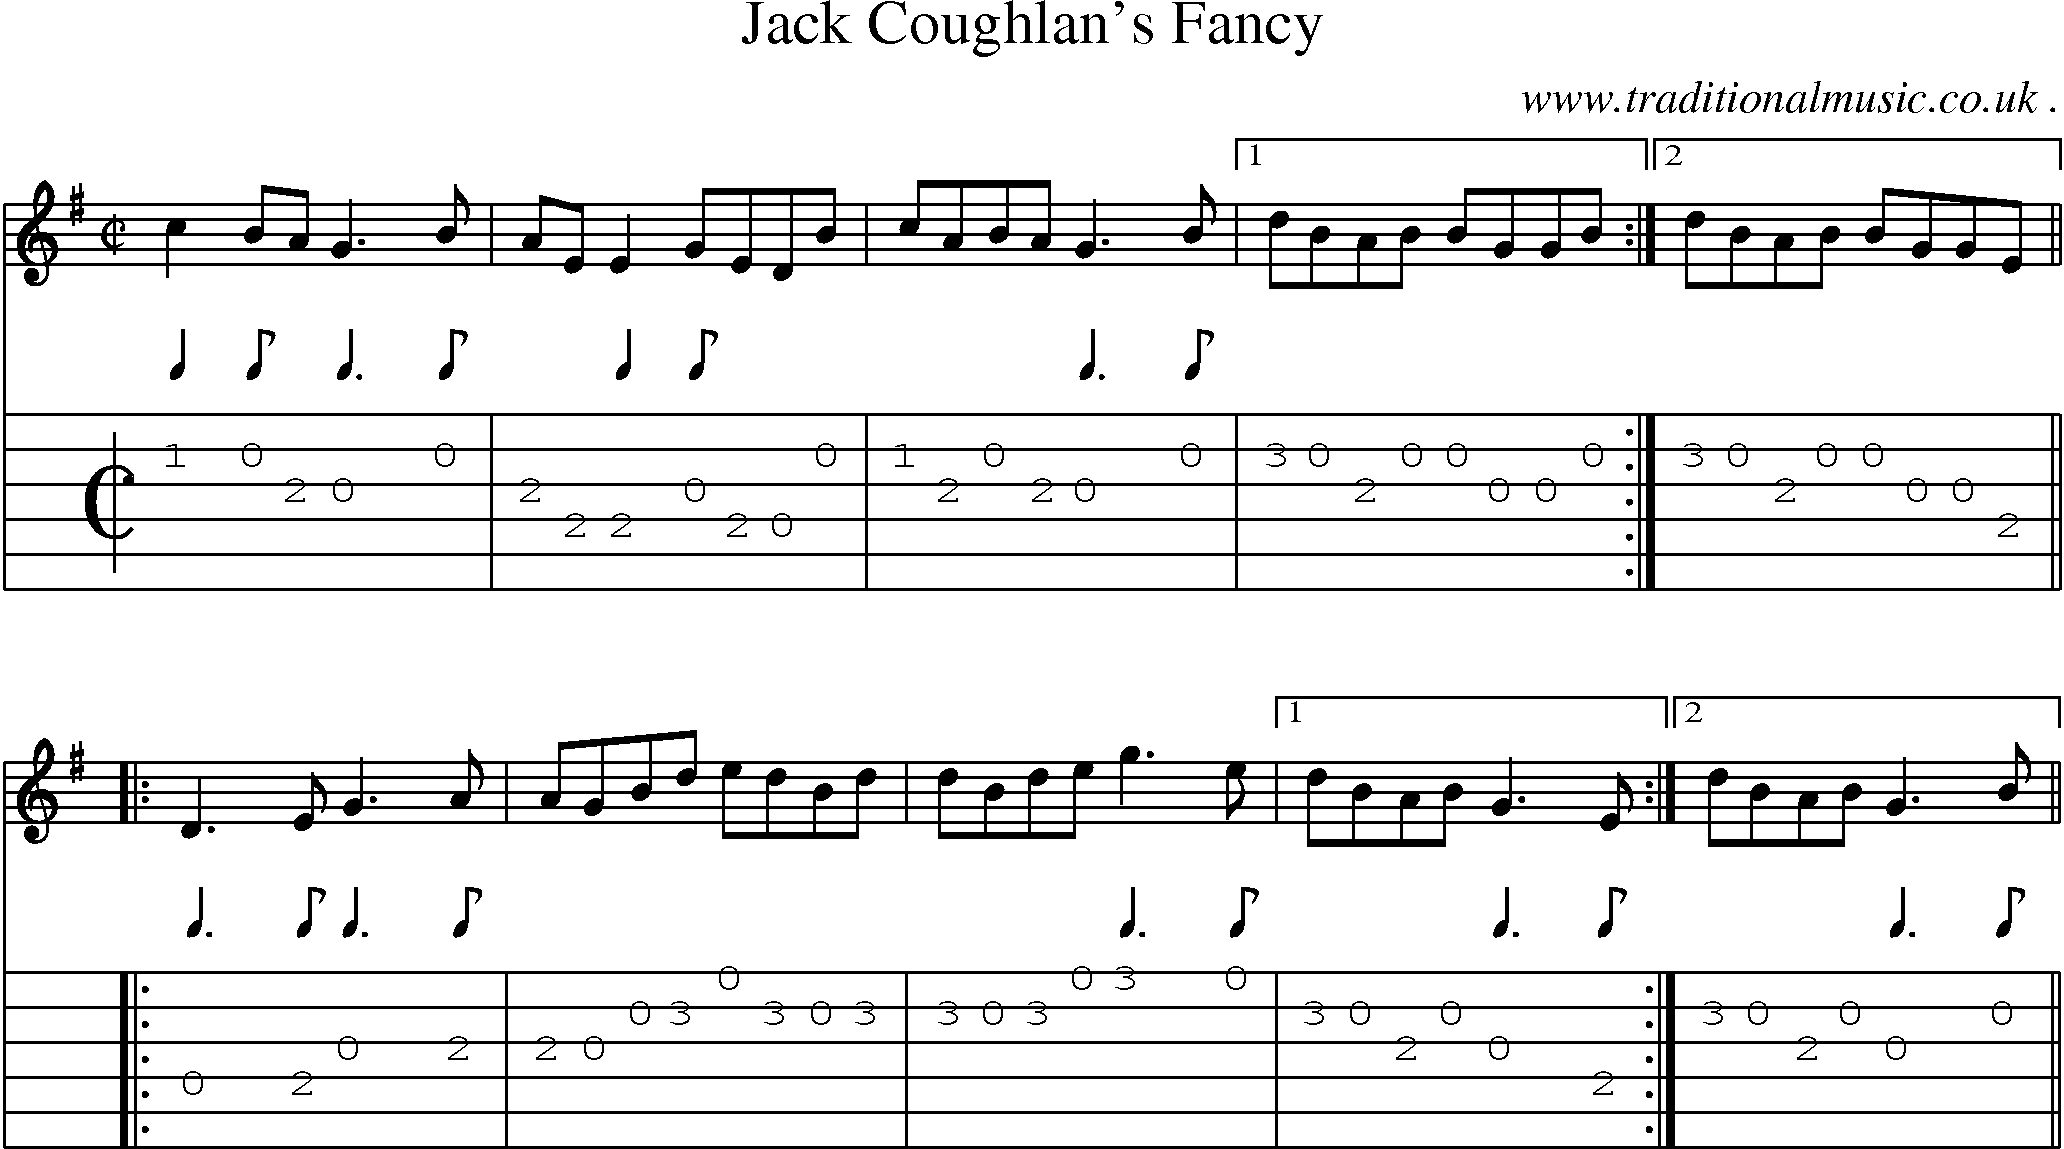 Sheet-Music and Guitar Tabs for Jack Coughlans Fancy